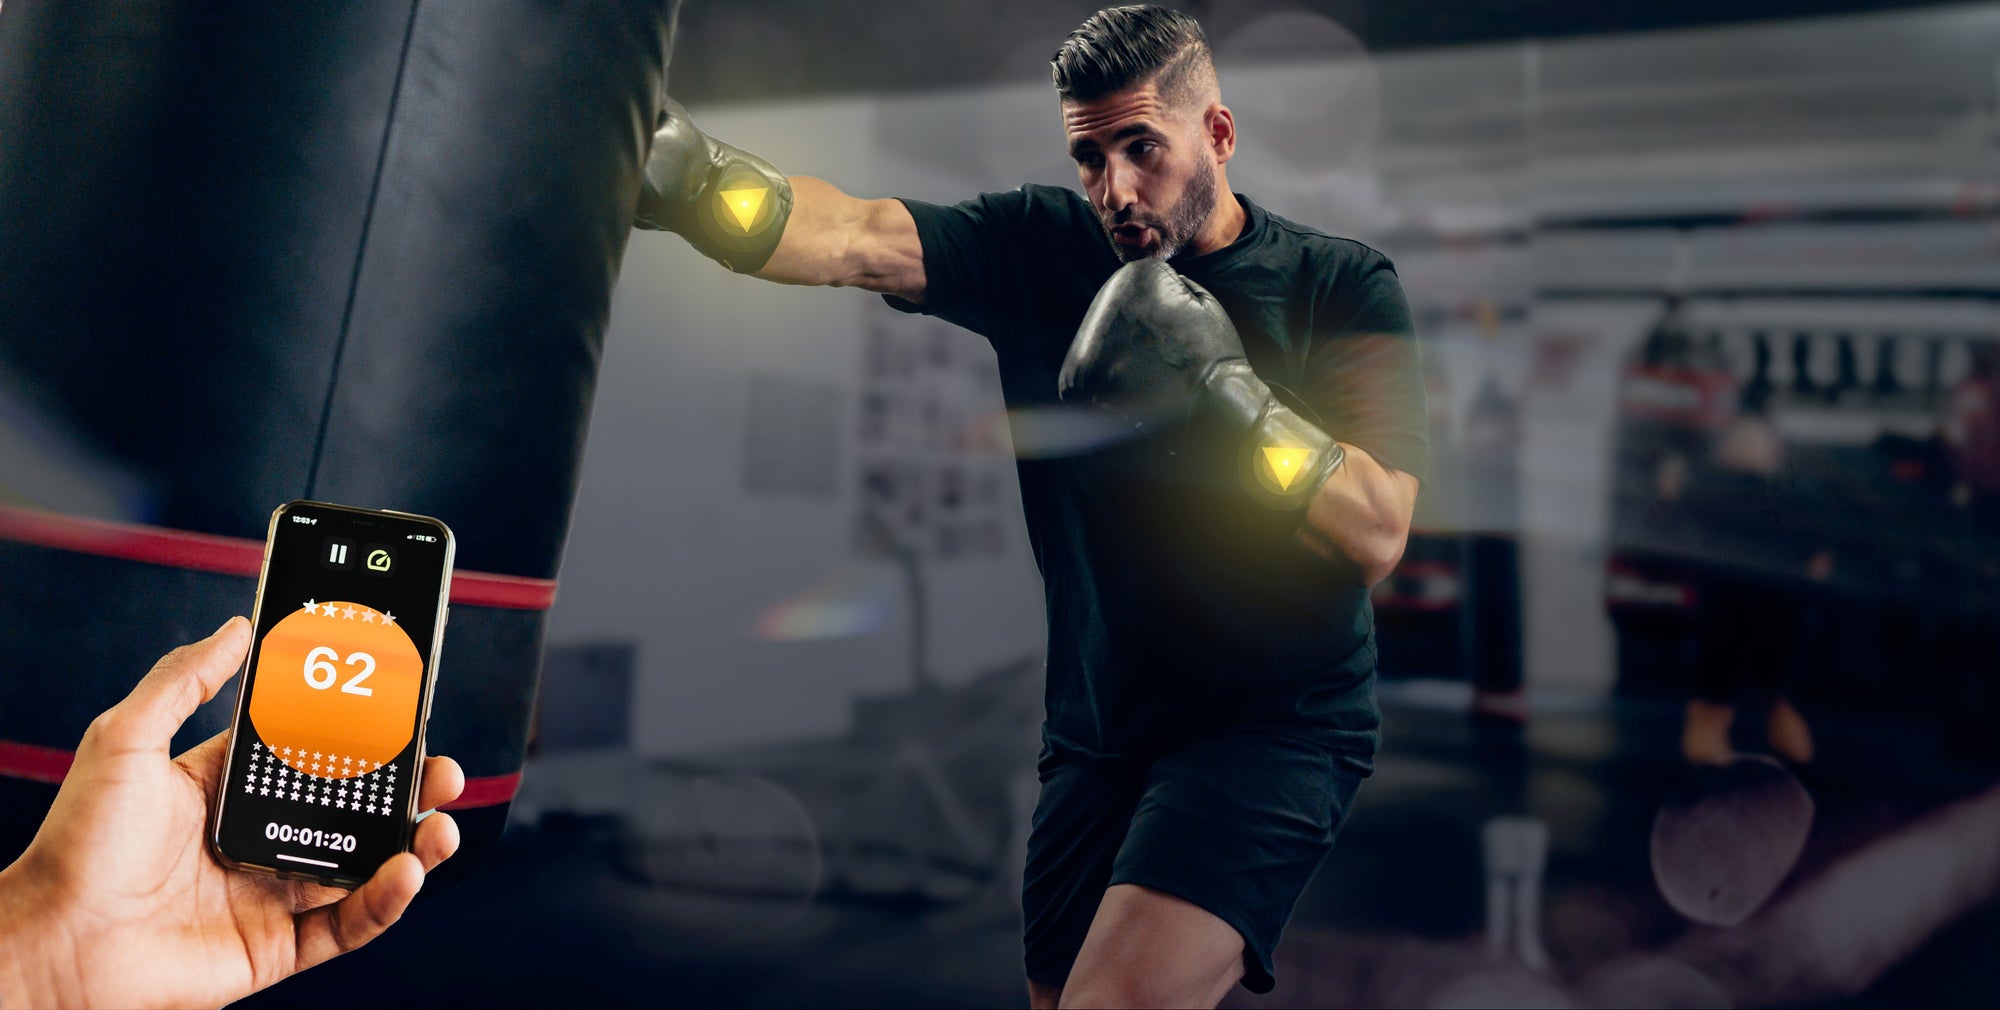 POWA Boxing Technology Tracking Punches with Boxer in Background 